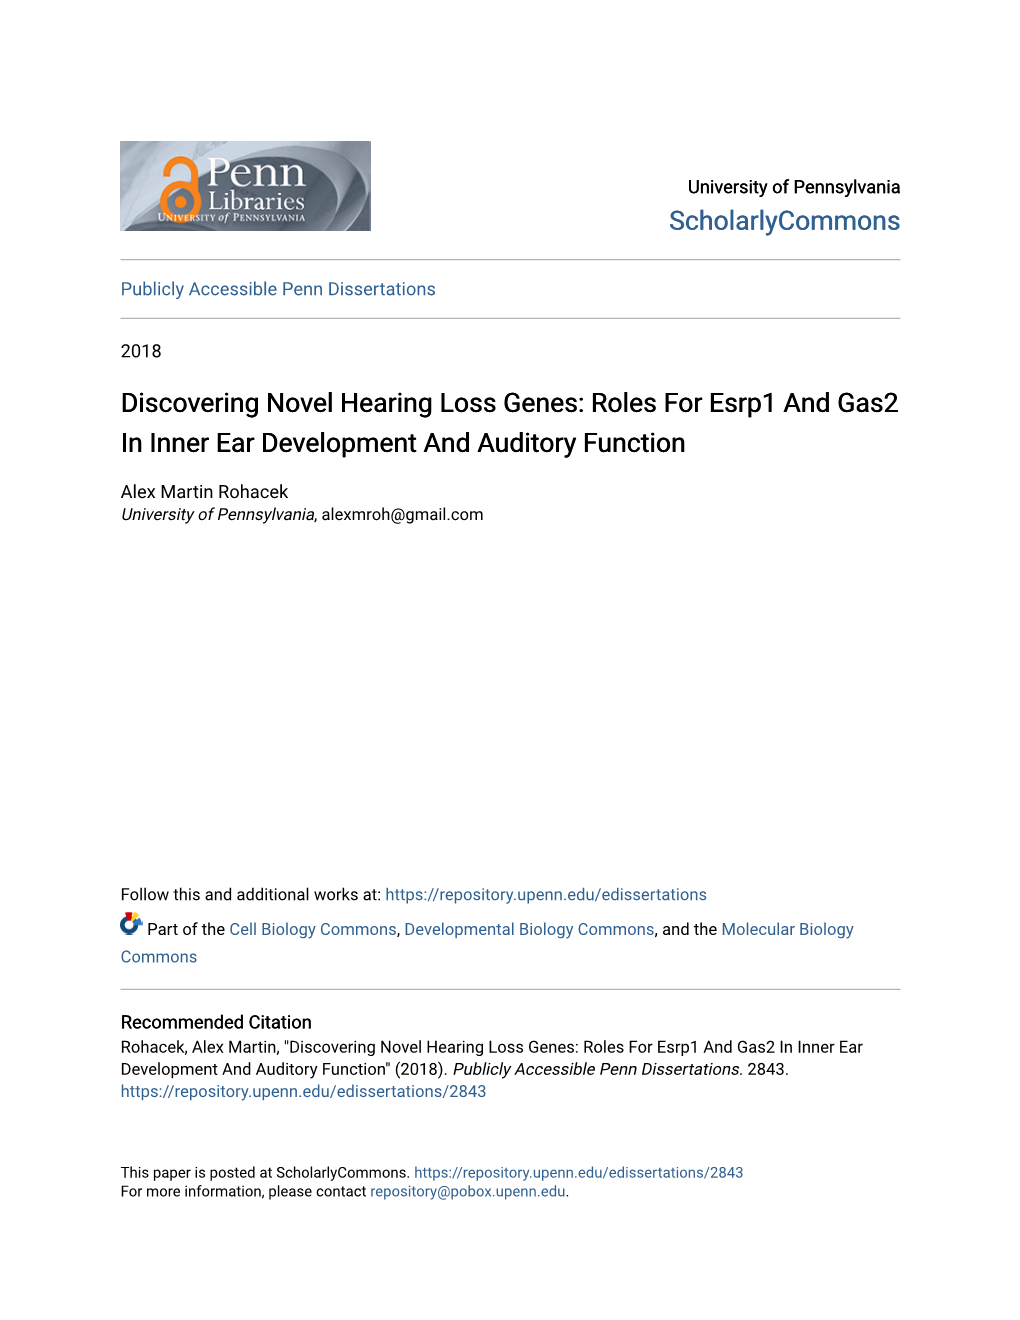 Discovering Novel Hearing Loss Genes: Roles for Esrp1 and Gas2 in Inner Ear Development and Auditory Function